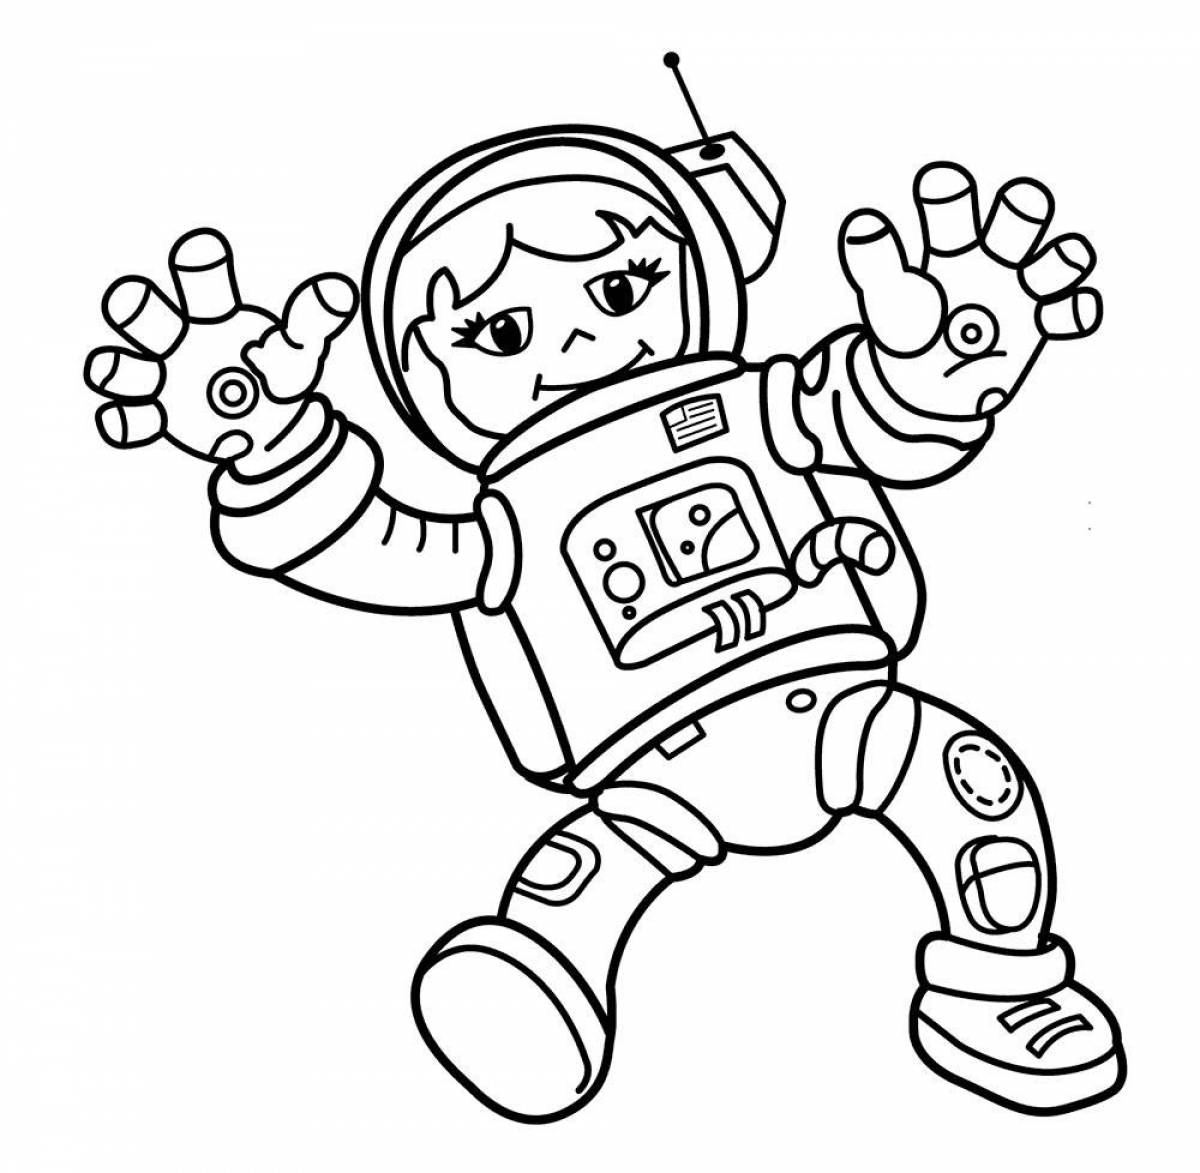 Amazing astronaut coloring page